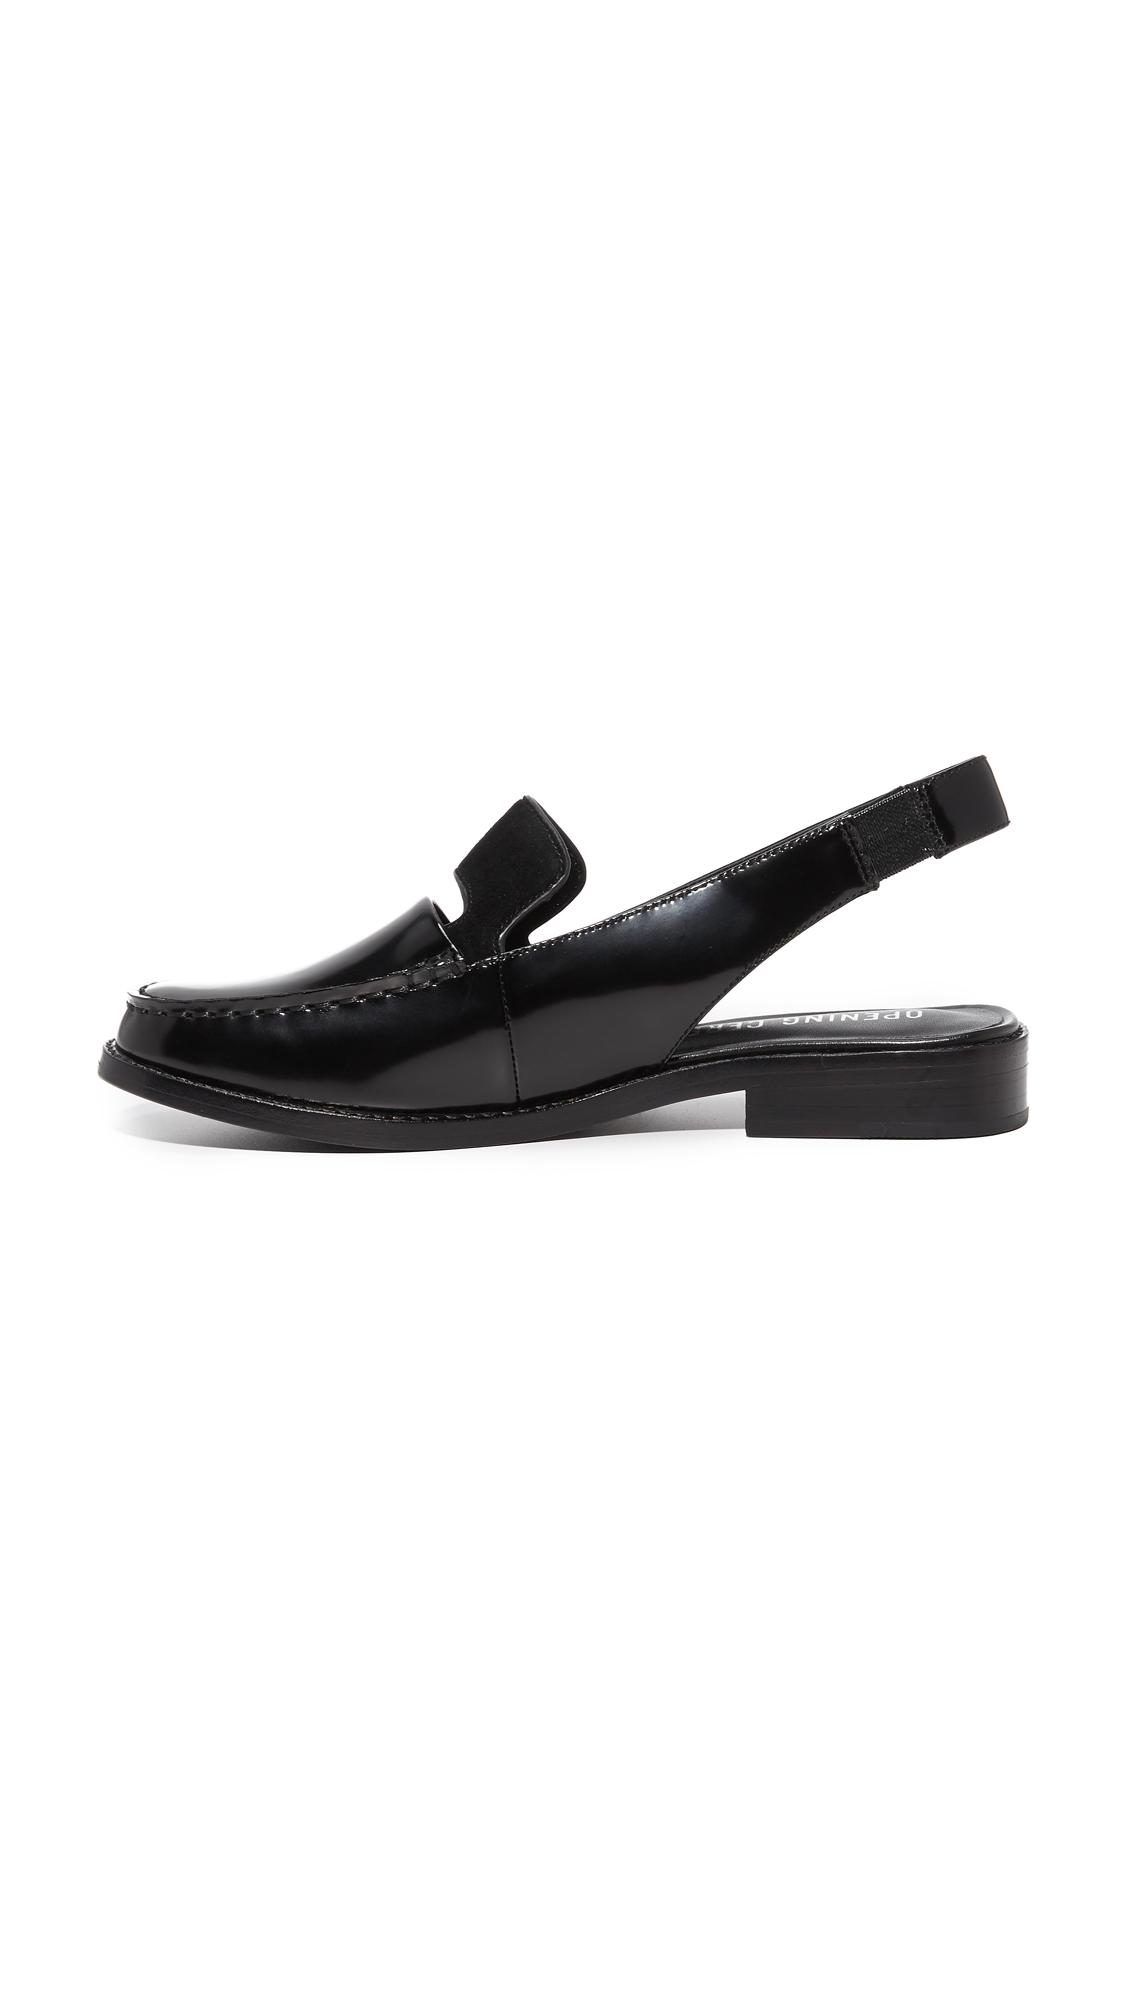 Opening Ceremony Bettsy Slingback Loafers in Black | Lyst